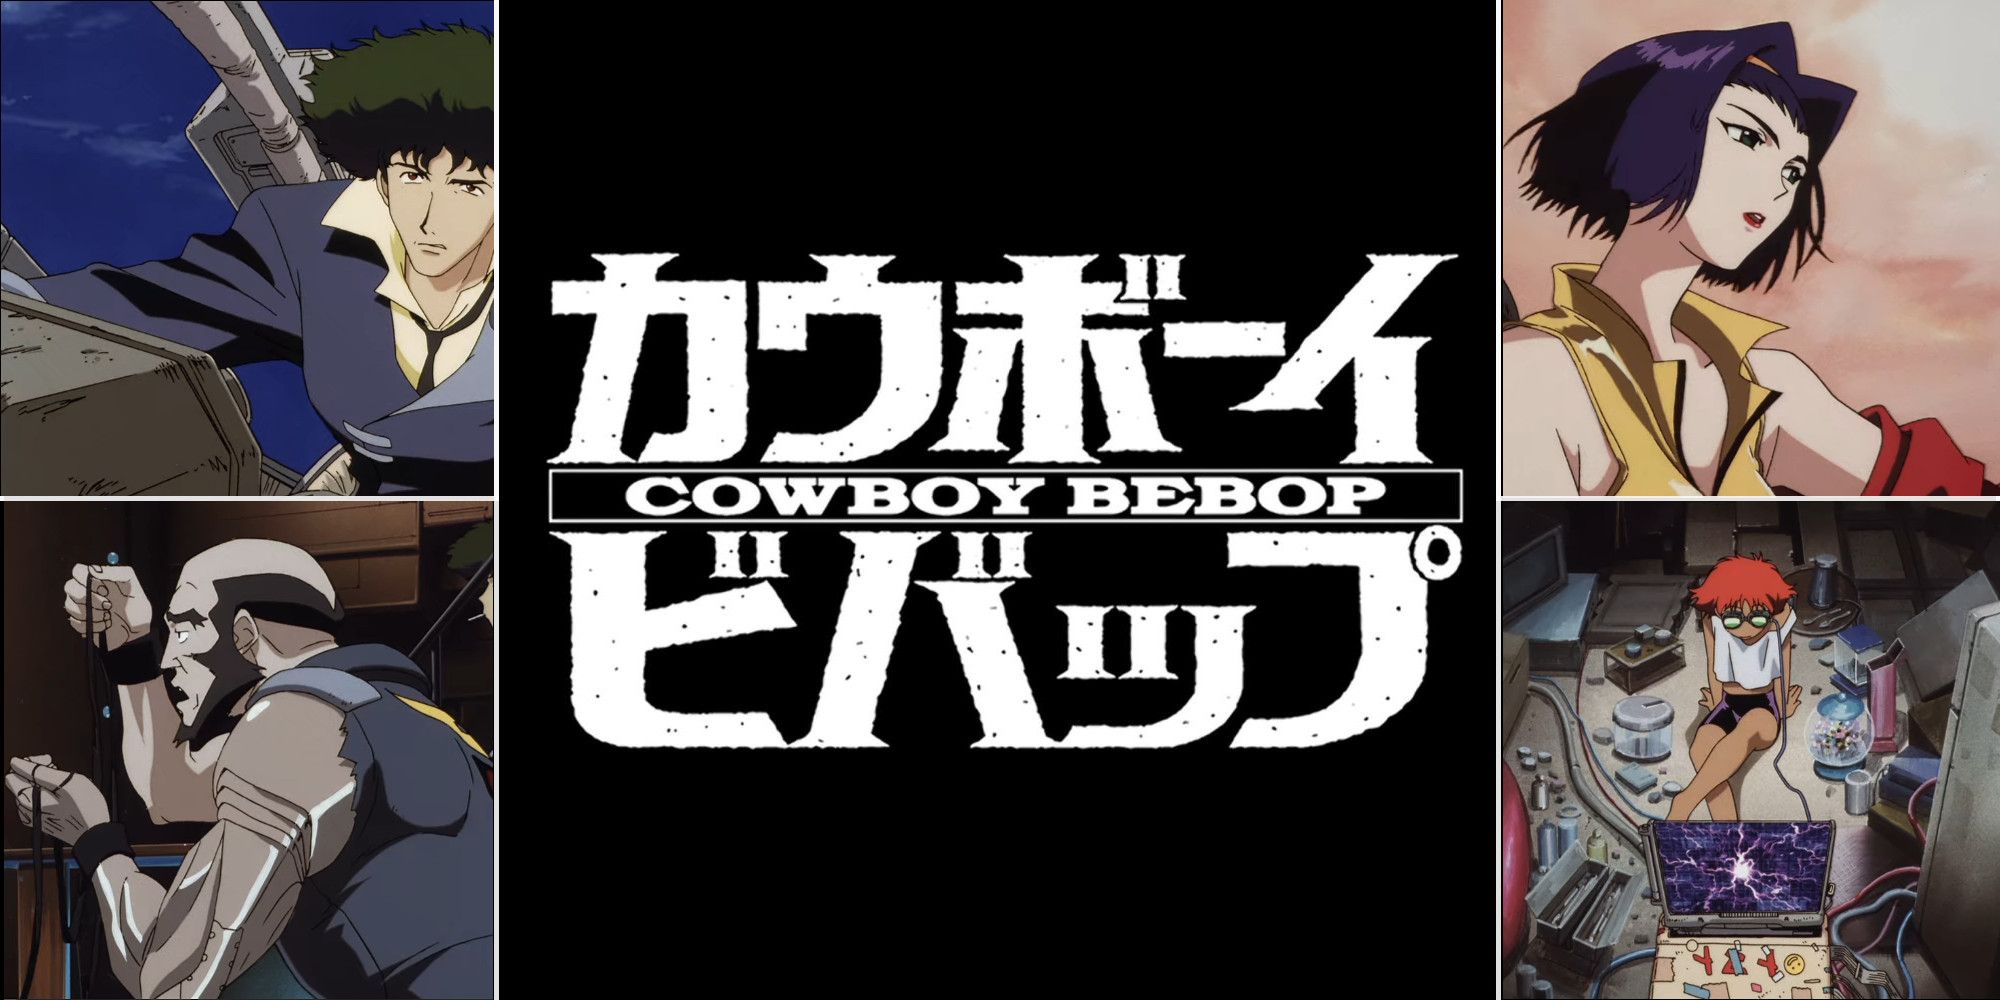 A composite image showing Spike, Jet, Faye, and Edward from Cowboy Bebop along with the series logo